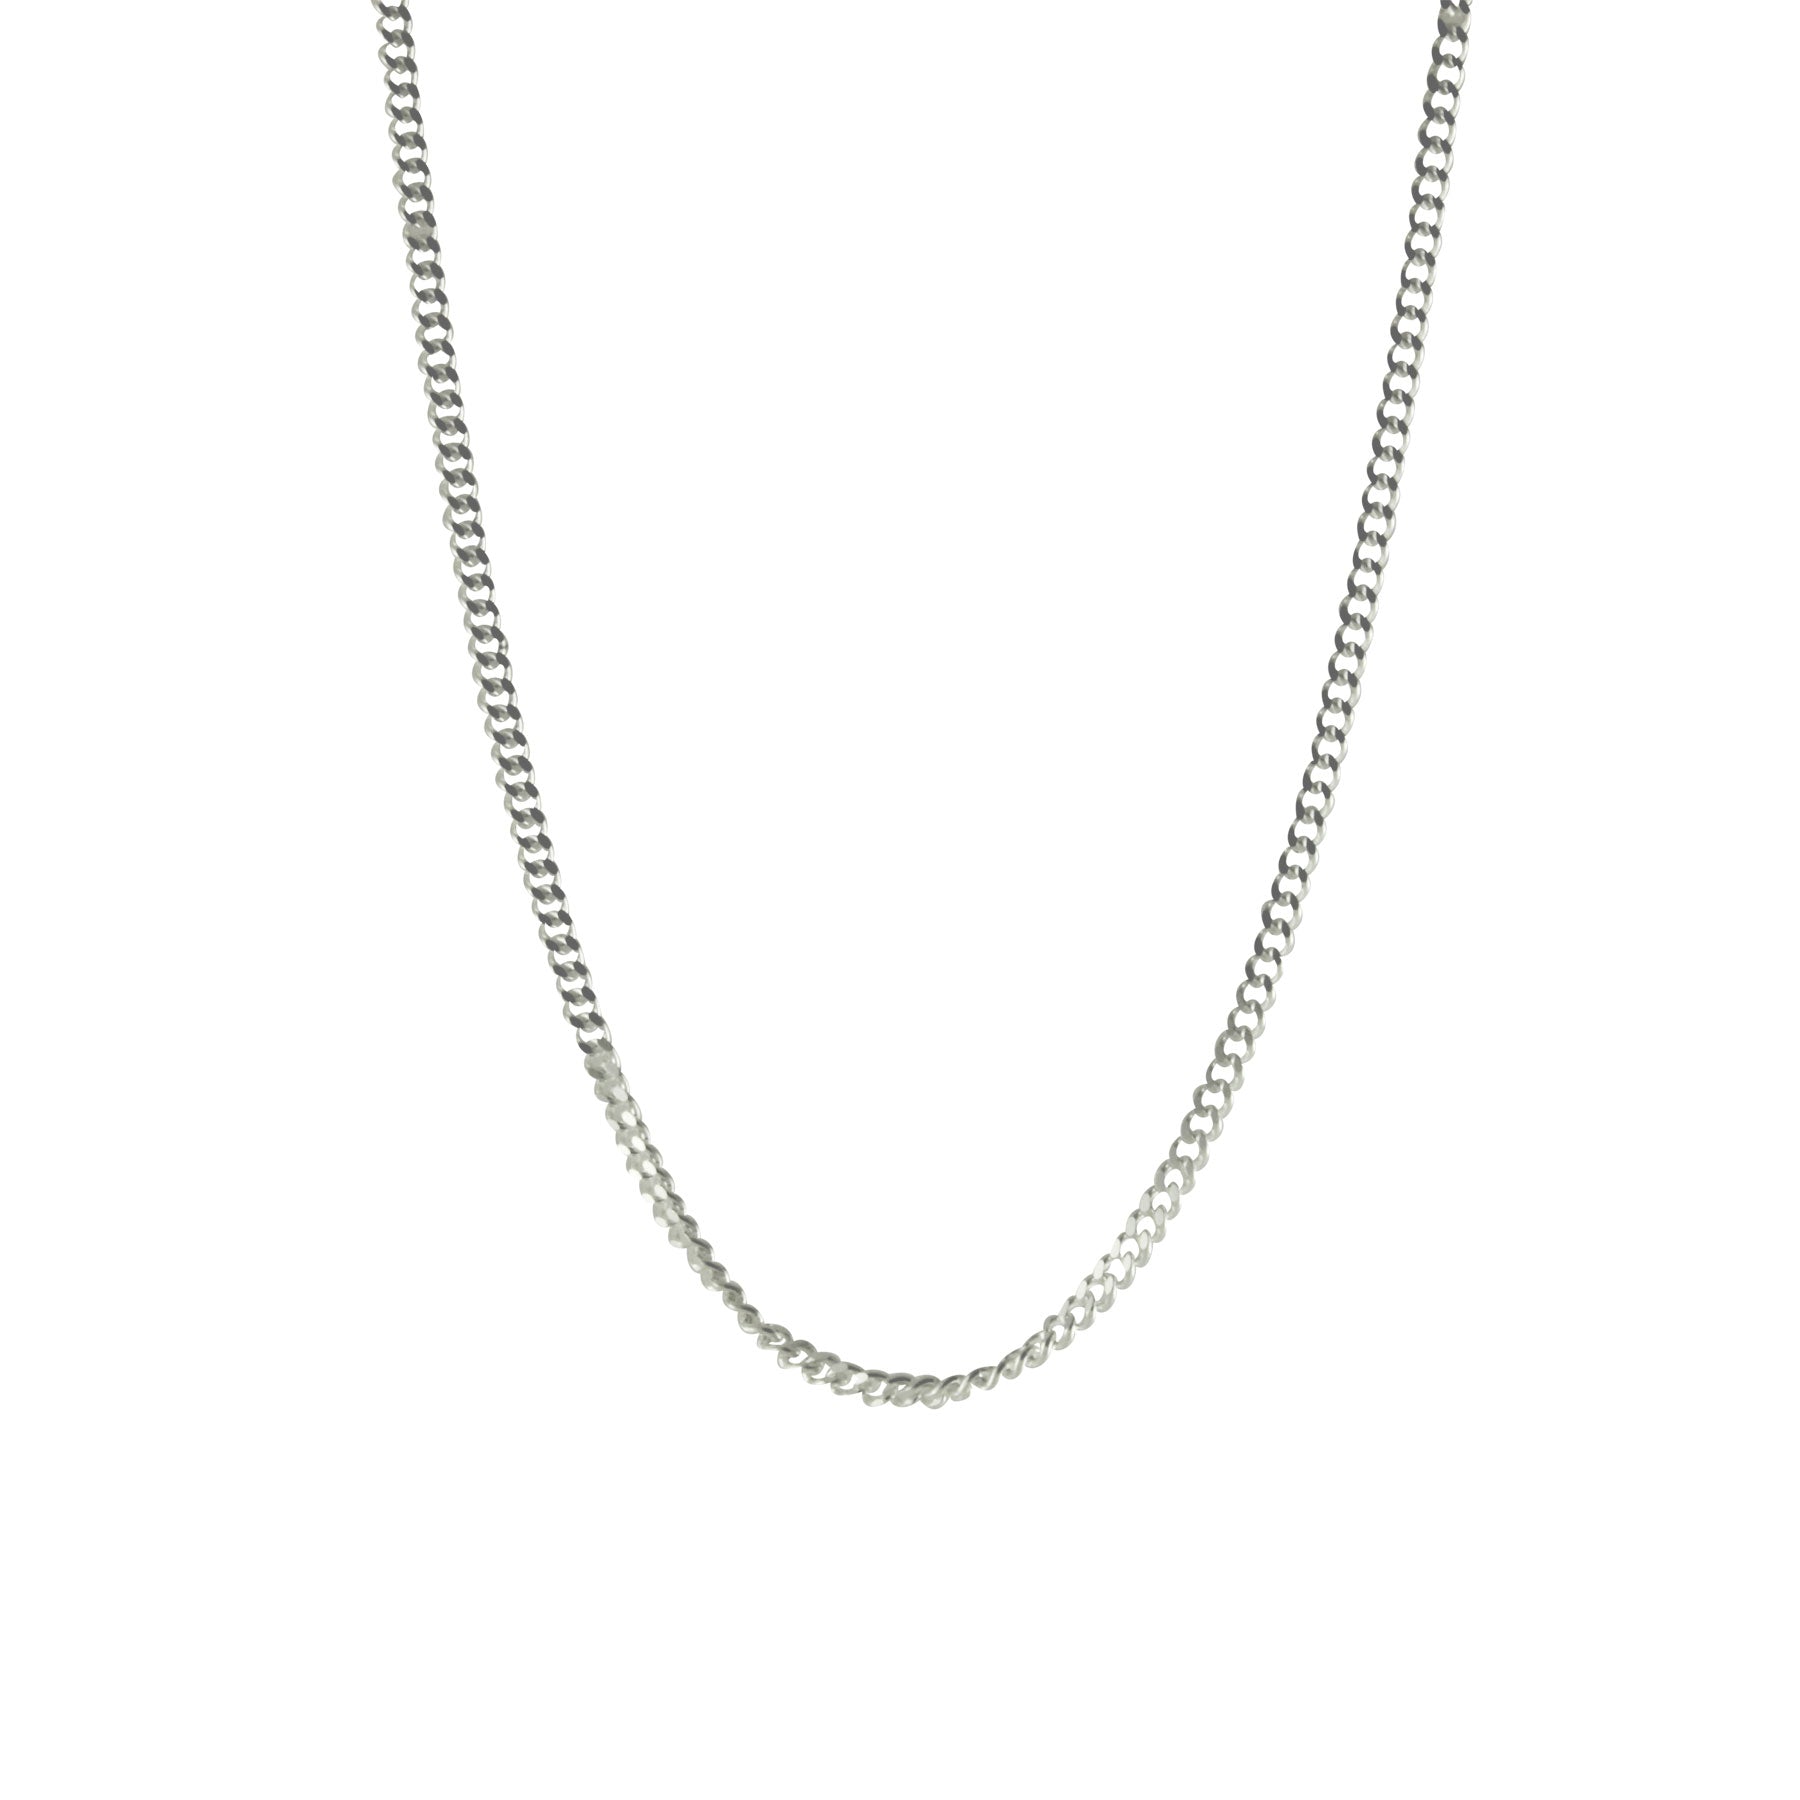 Sterling Silver Miami Style Link Curb Chain Adjustable Necklace